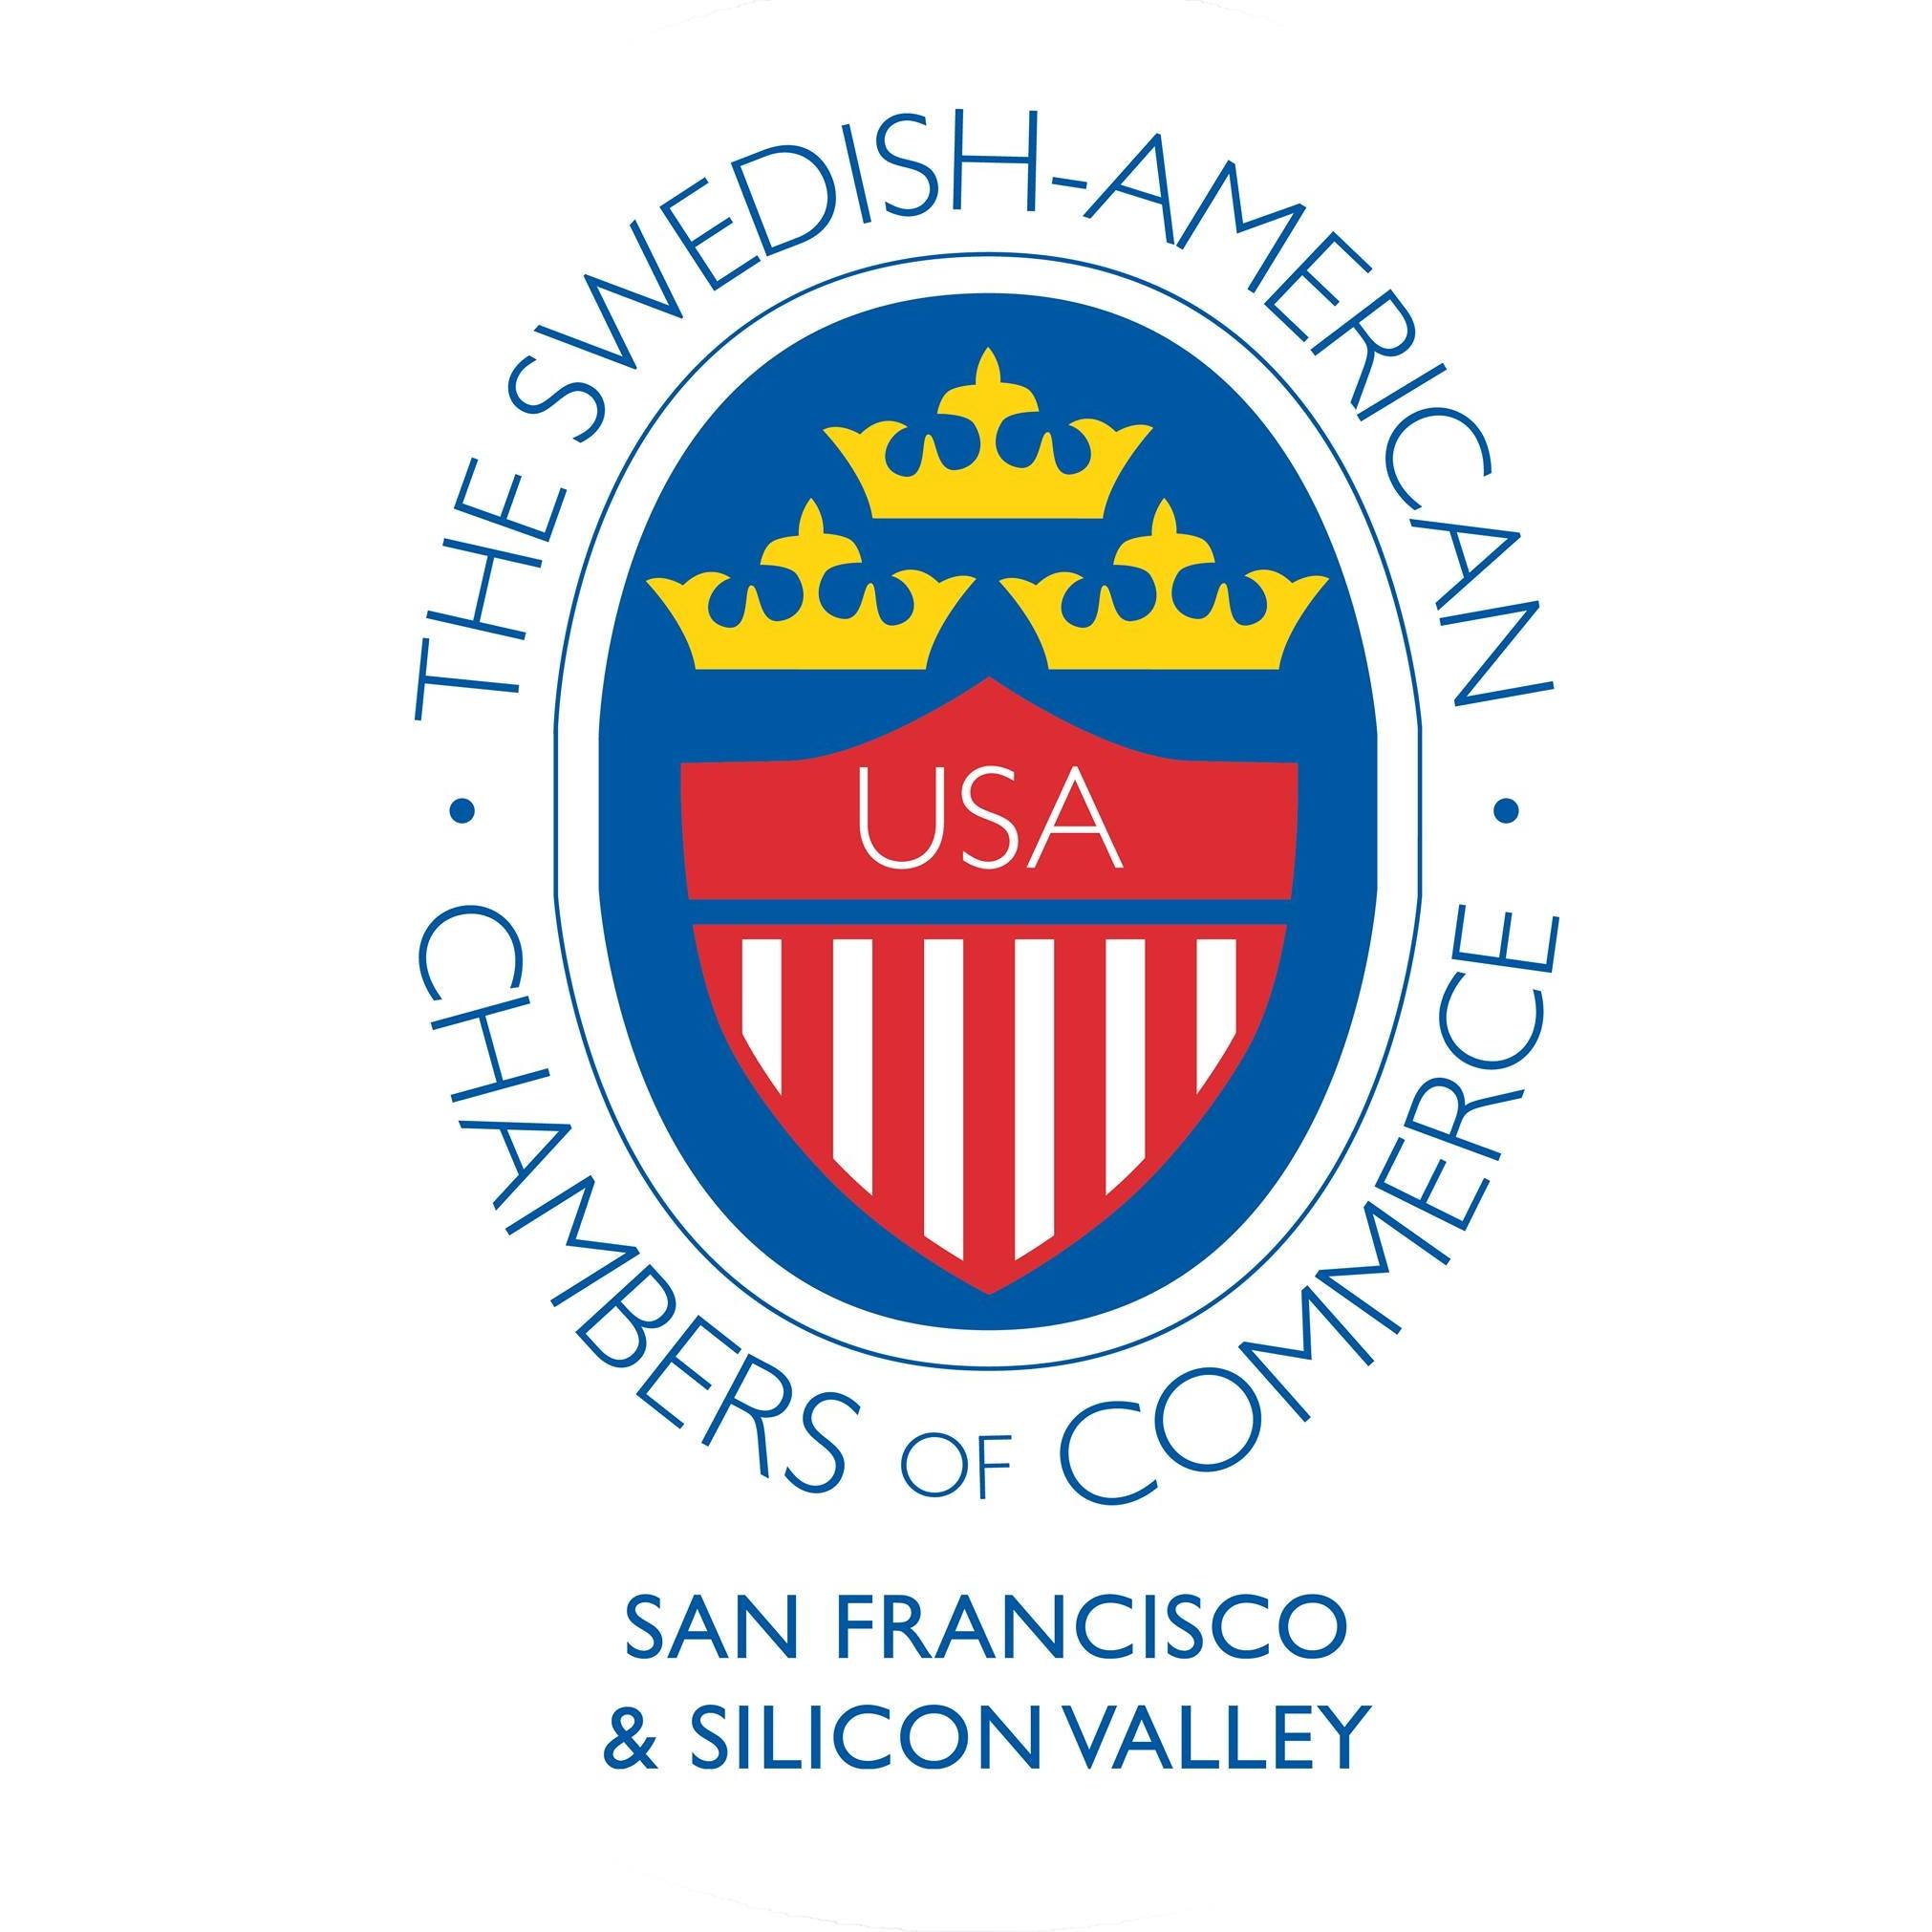 The Swedish-American Chamber of Commerce & Silicon Valley